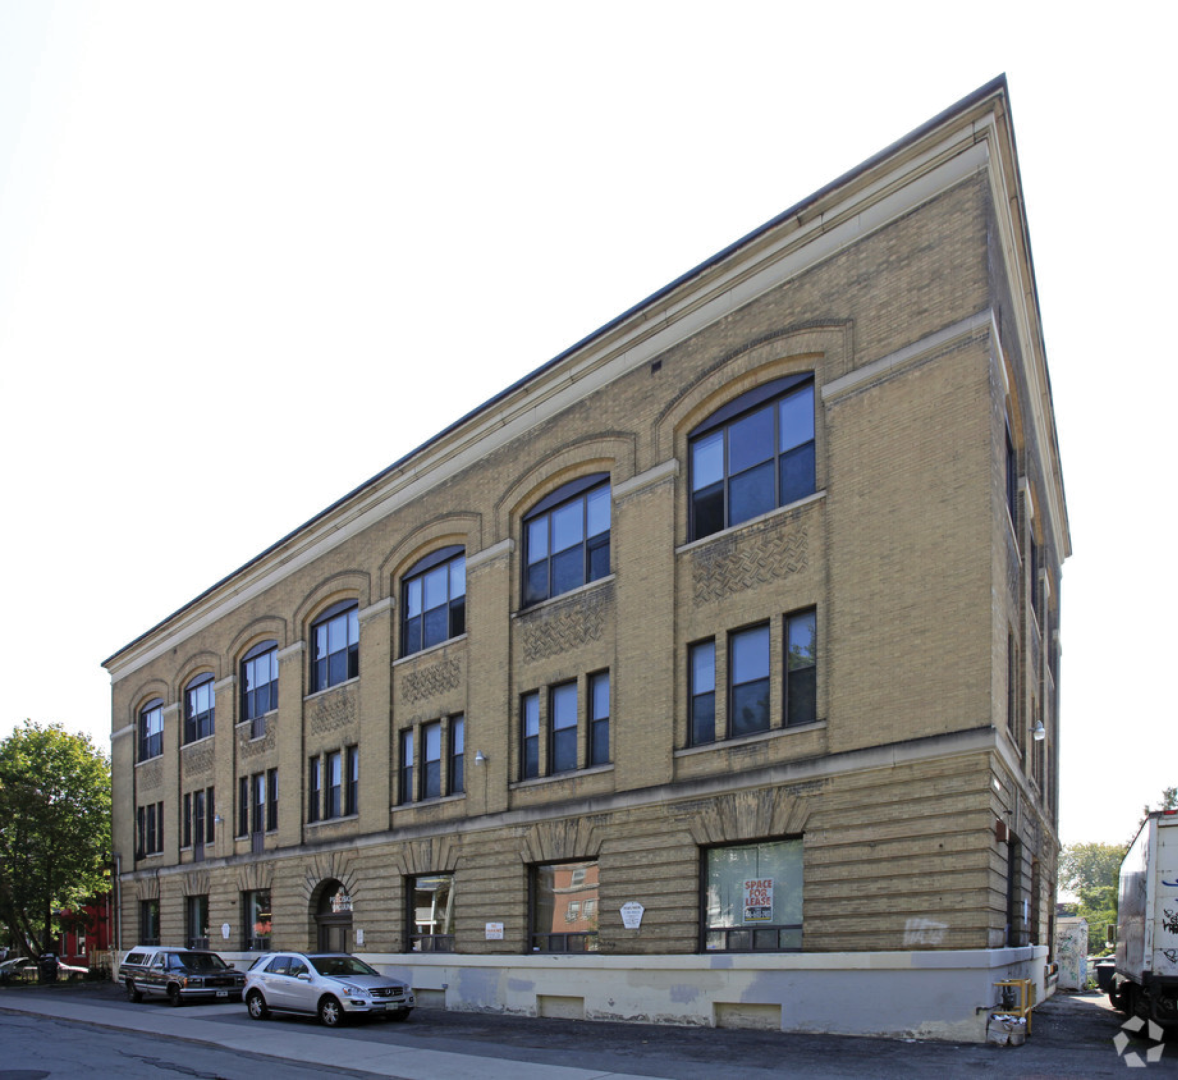 91 Oxford building exterior with street view 